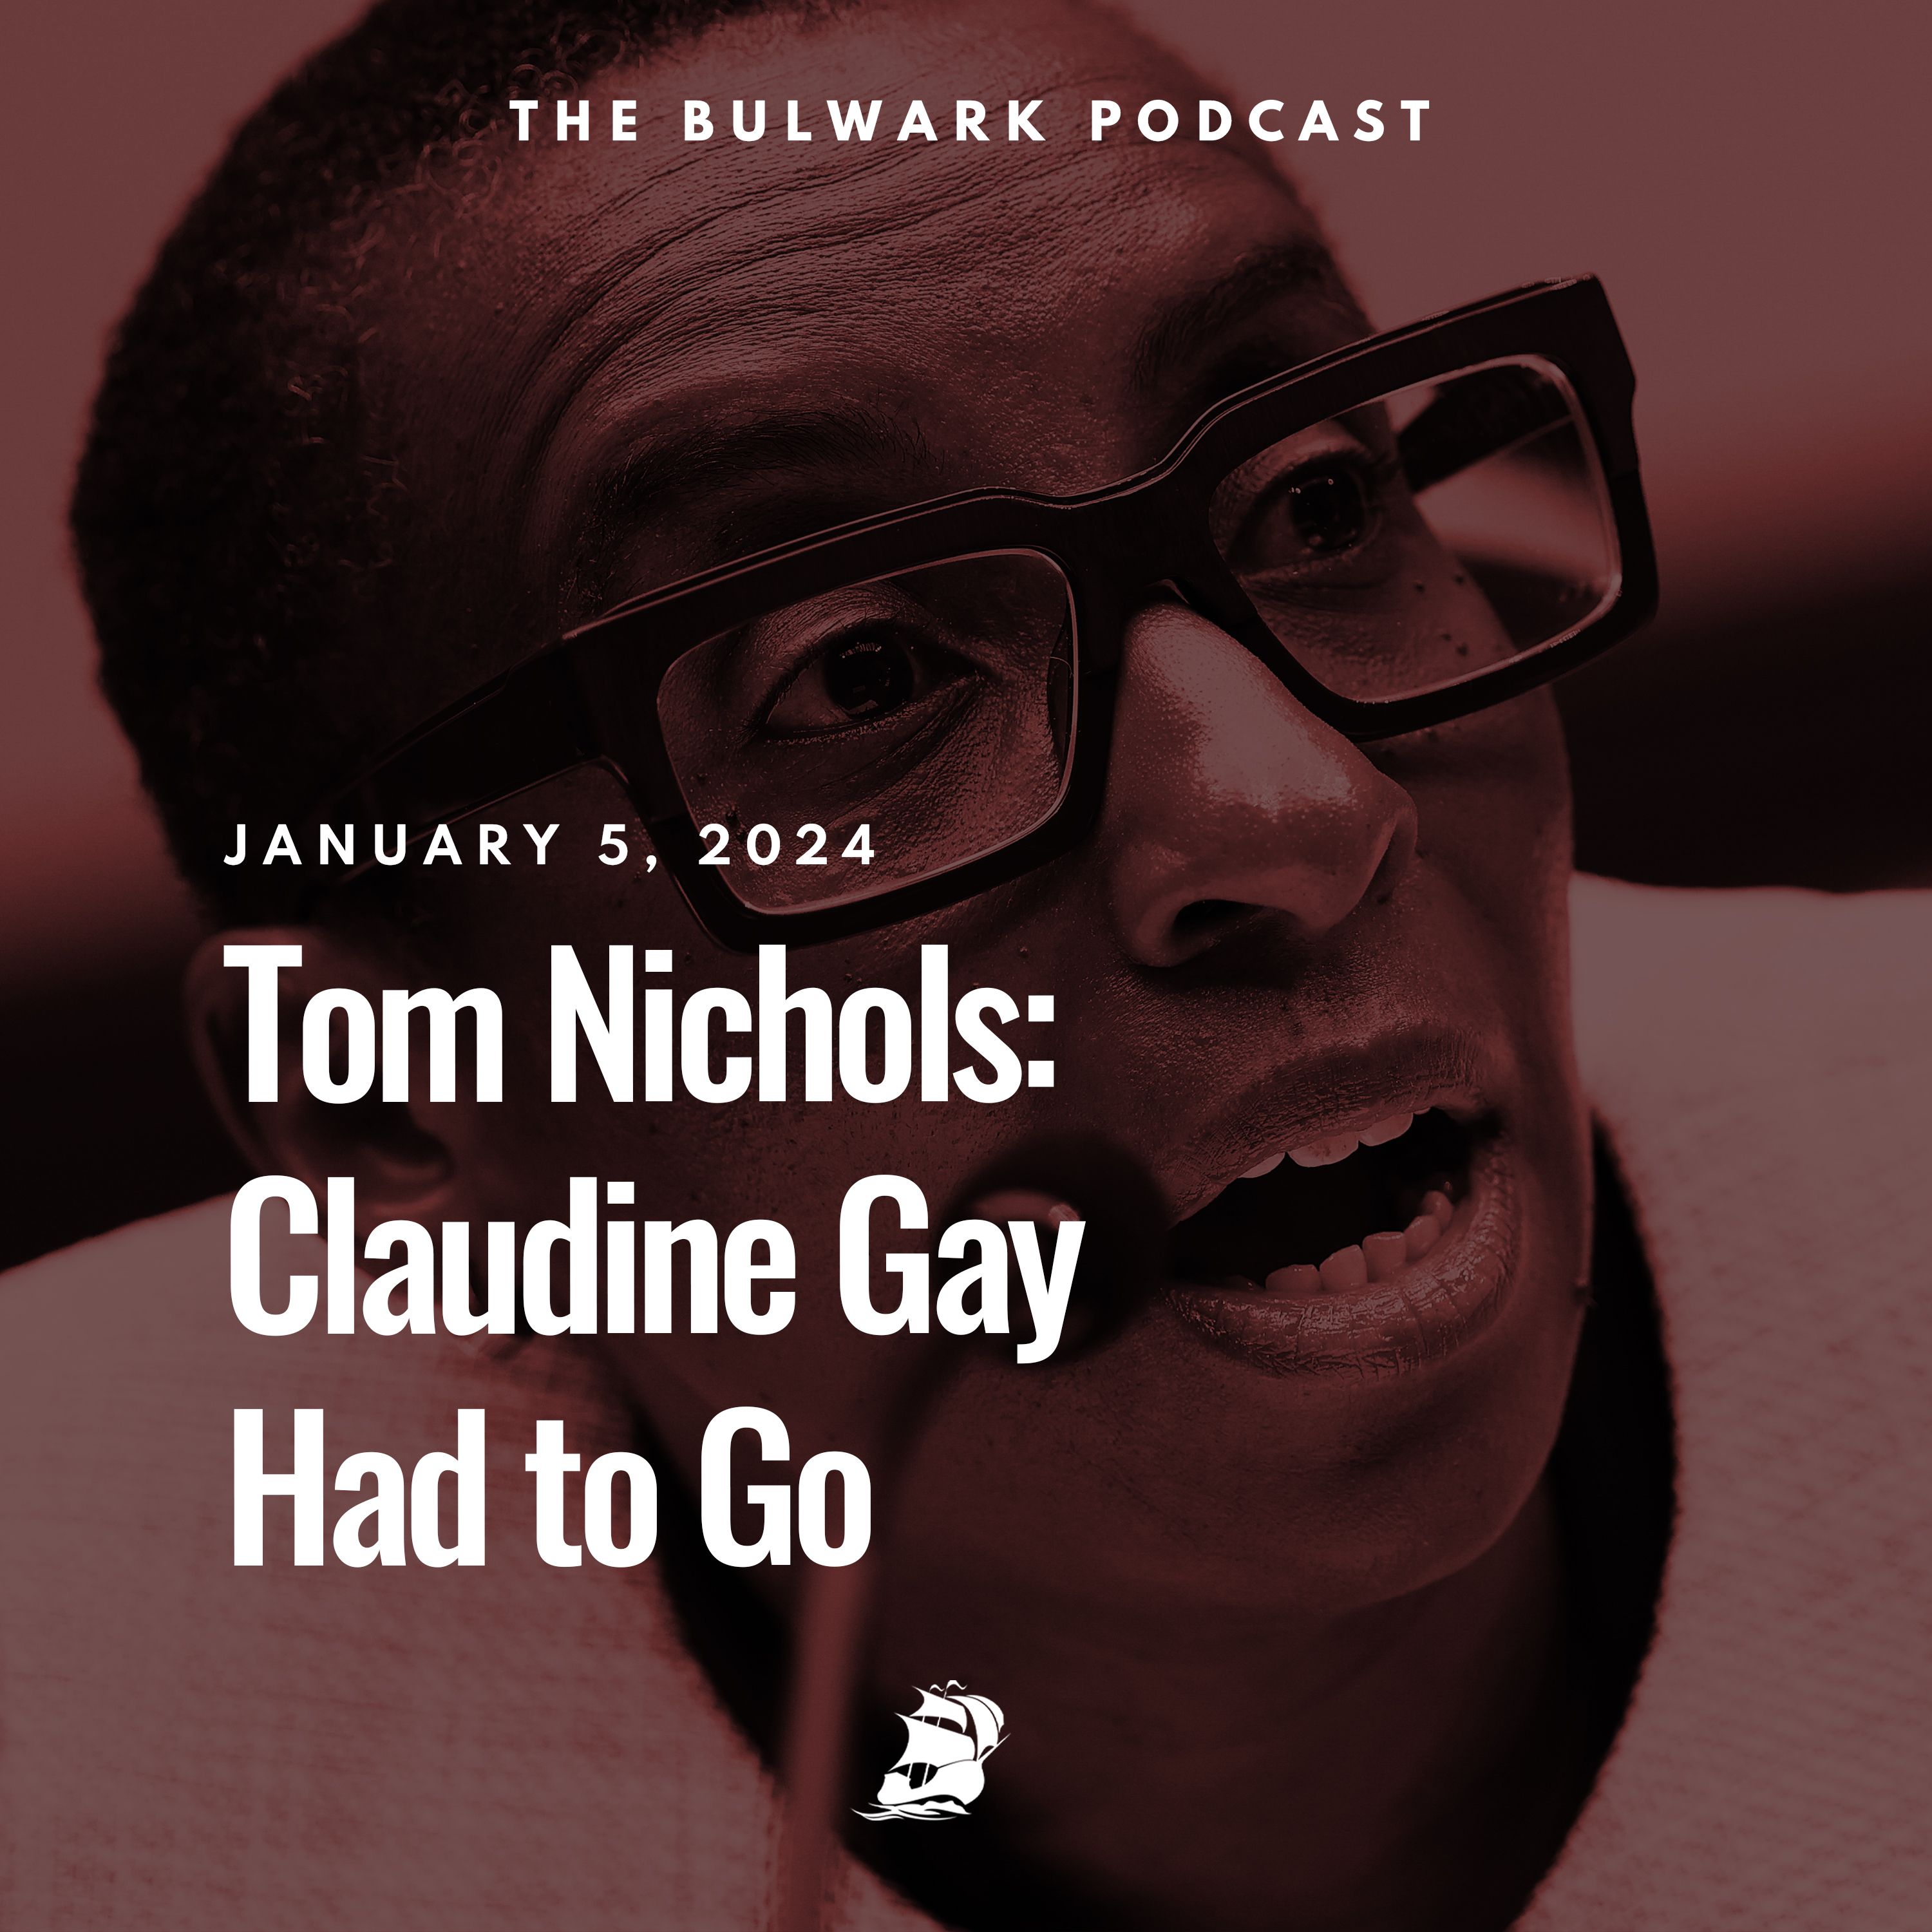 Tom Nichols: Claudine Gay Had to Go by The Bulwark Podcast